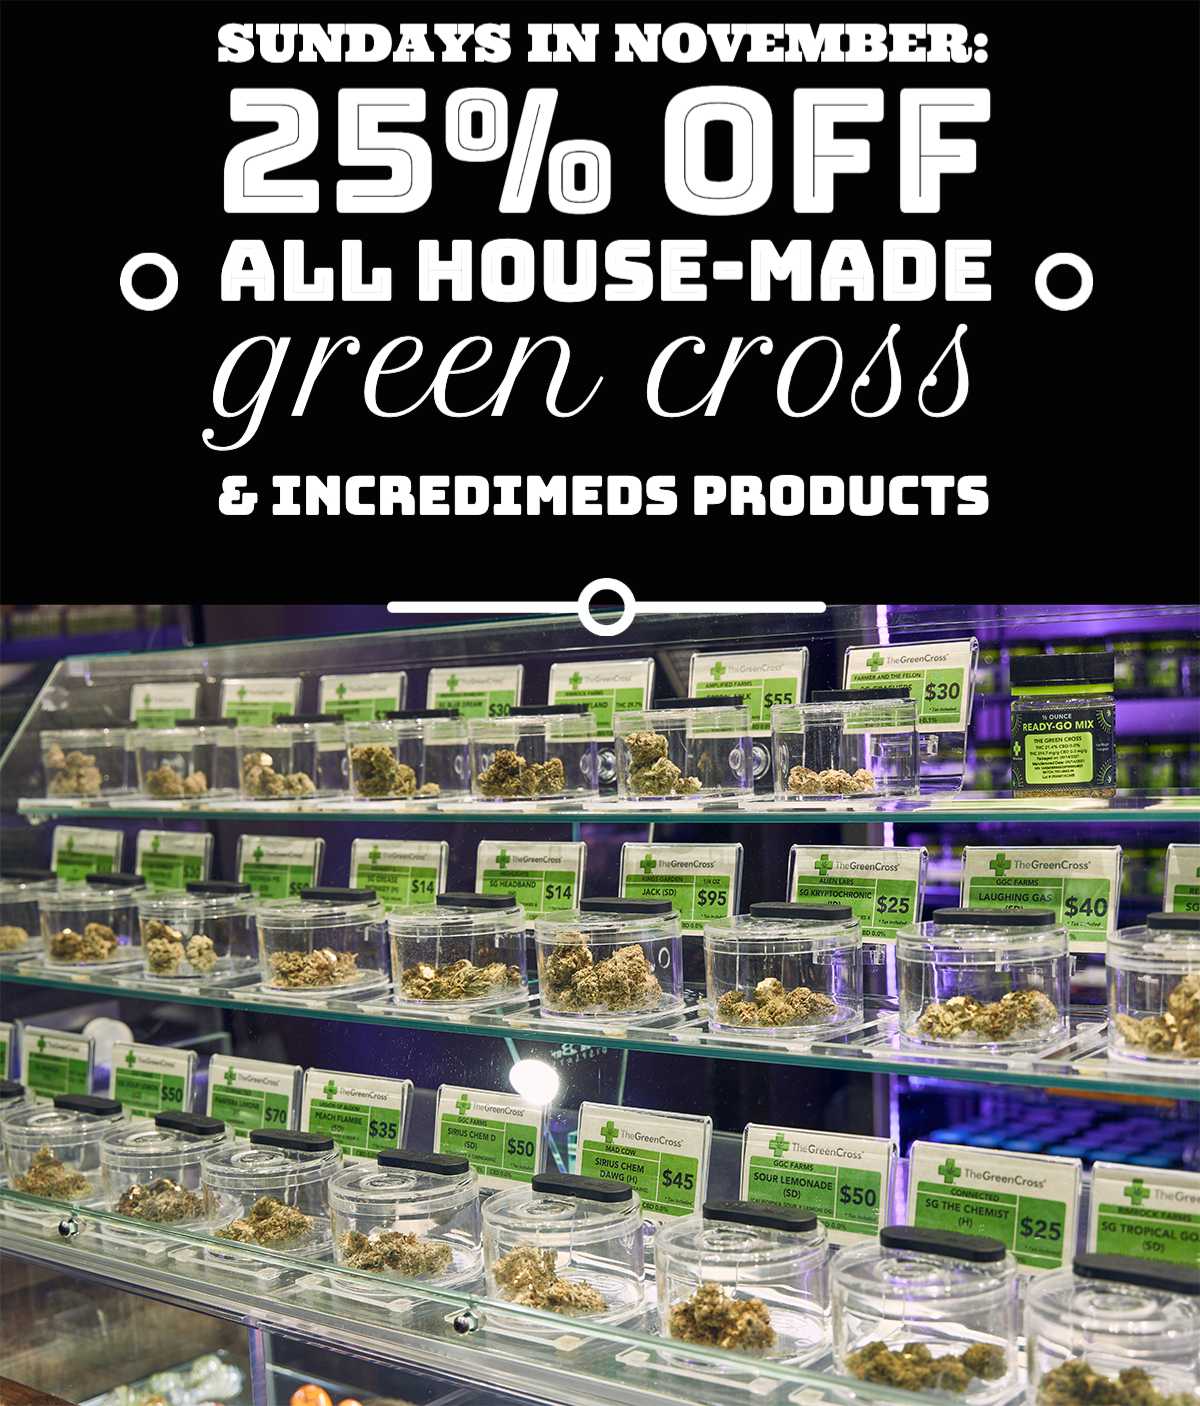 Sundays in November: 25% off all House-Made Green Cross & IncrediMeds products